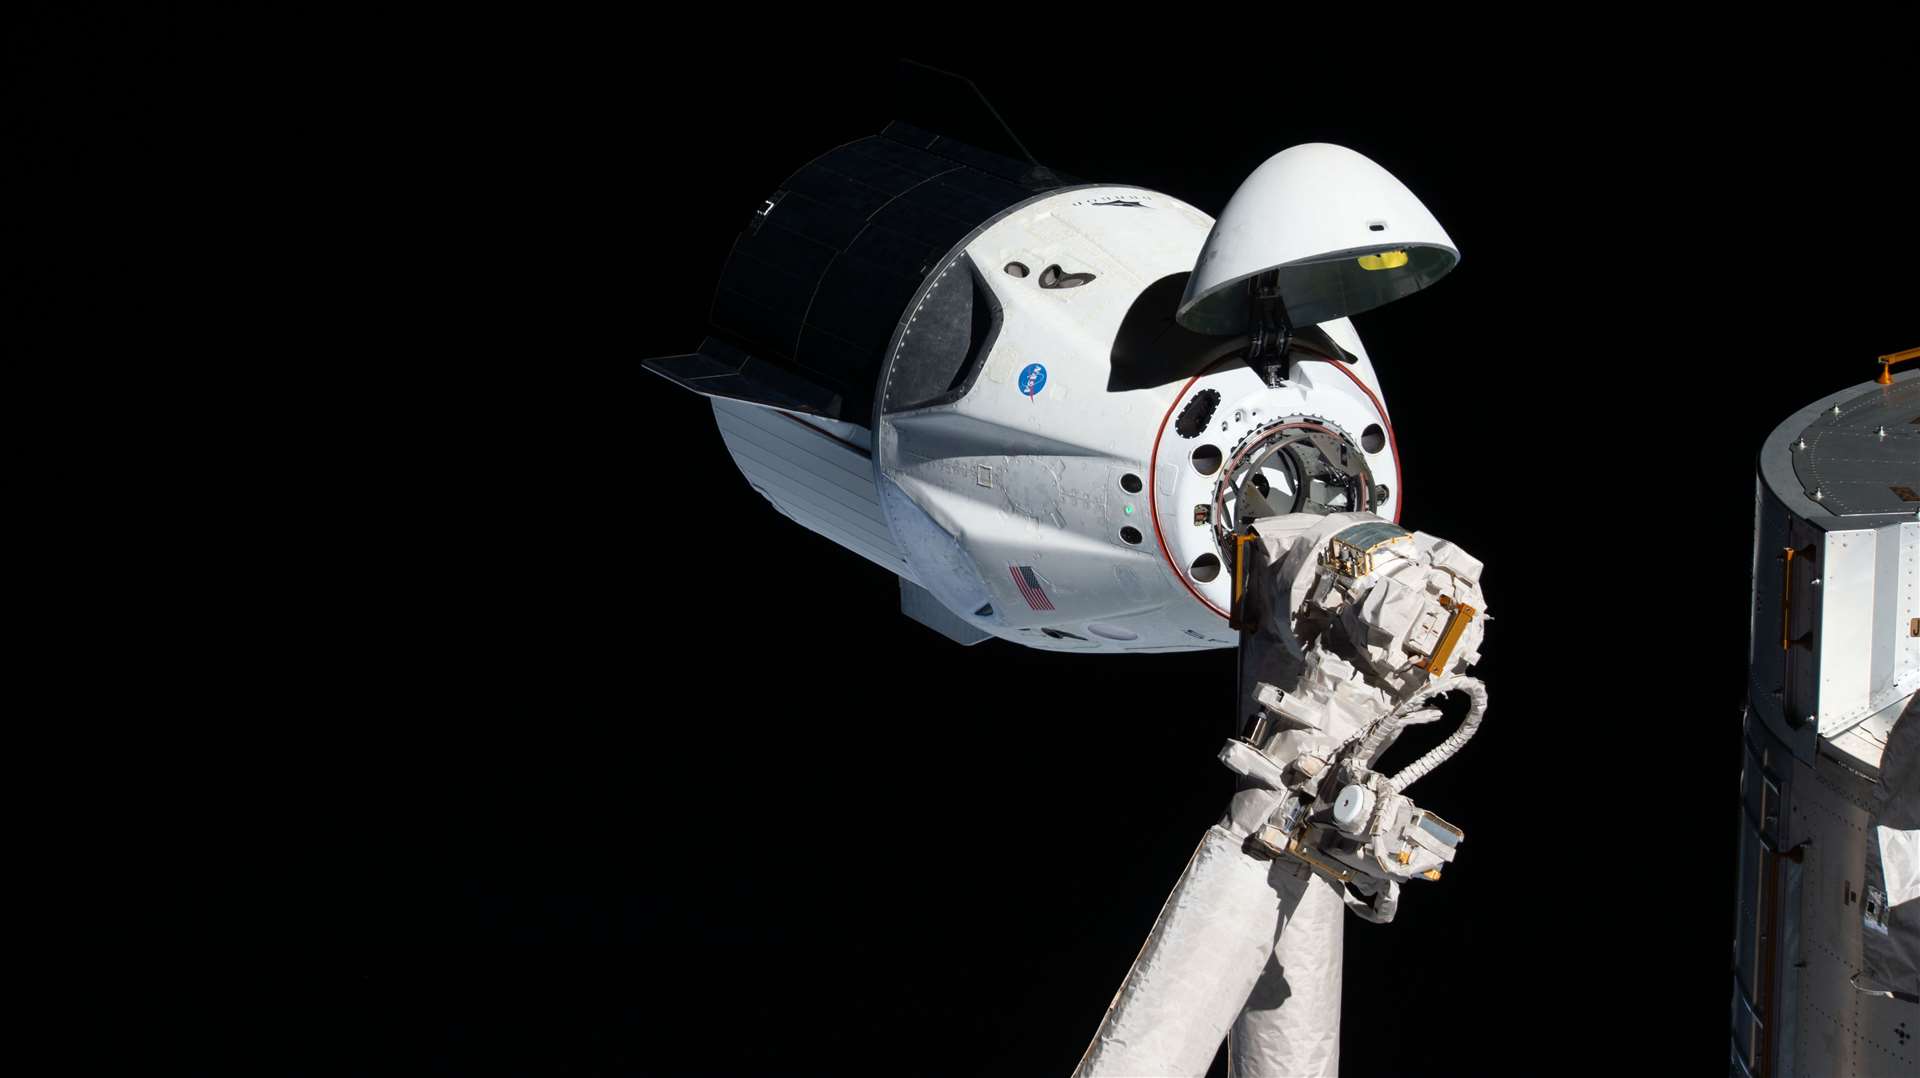 Crew Dragon capsule, just moments before docking with the space station (Nasa)